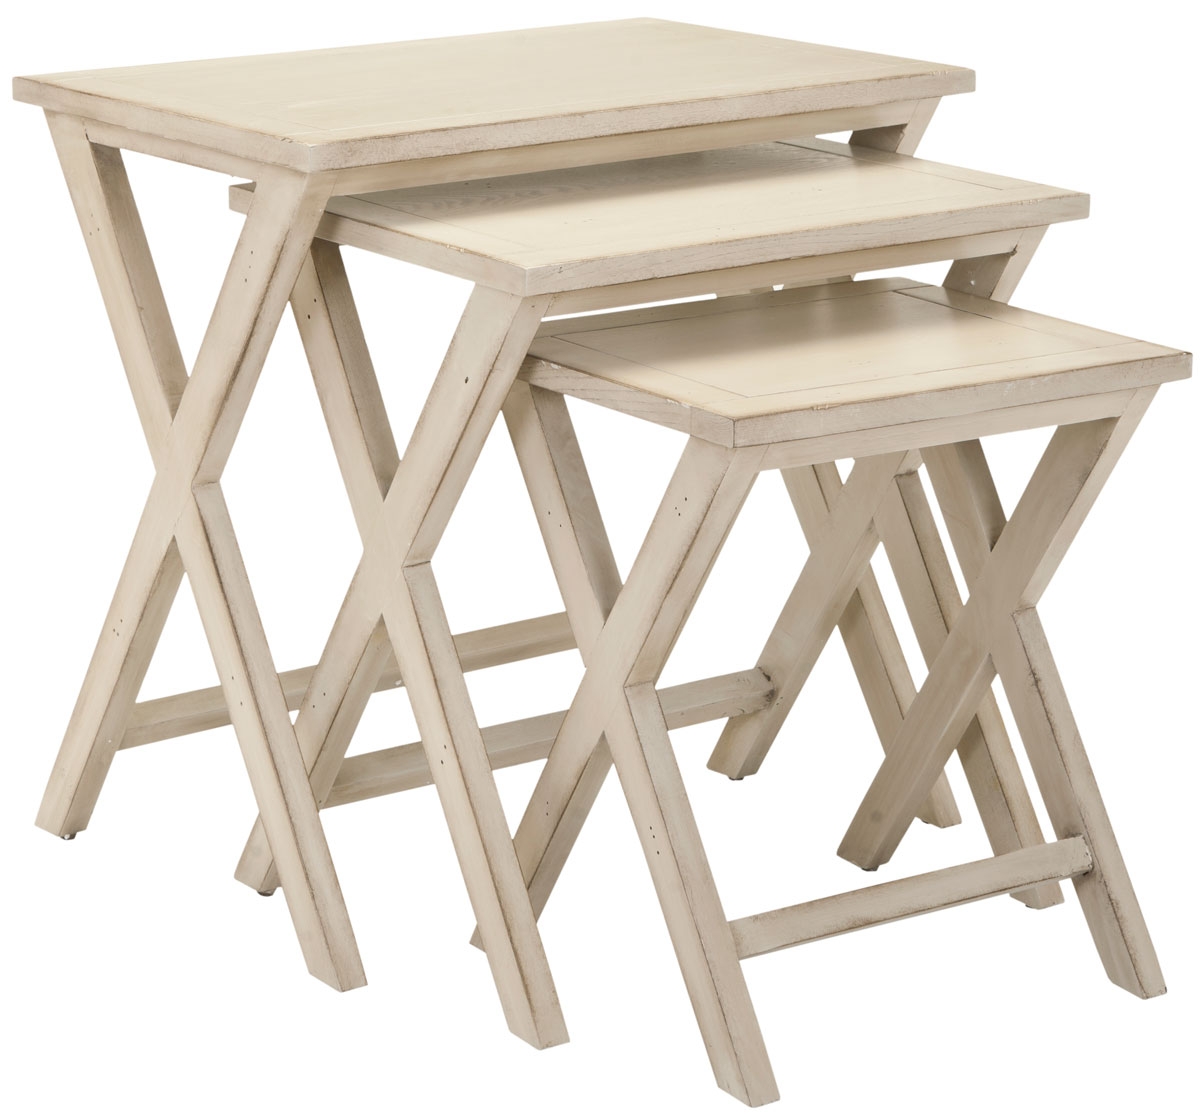 Maryann Stacking Tray Tables - White - Arlo Home - Image 1